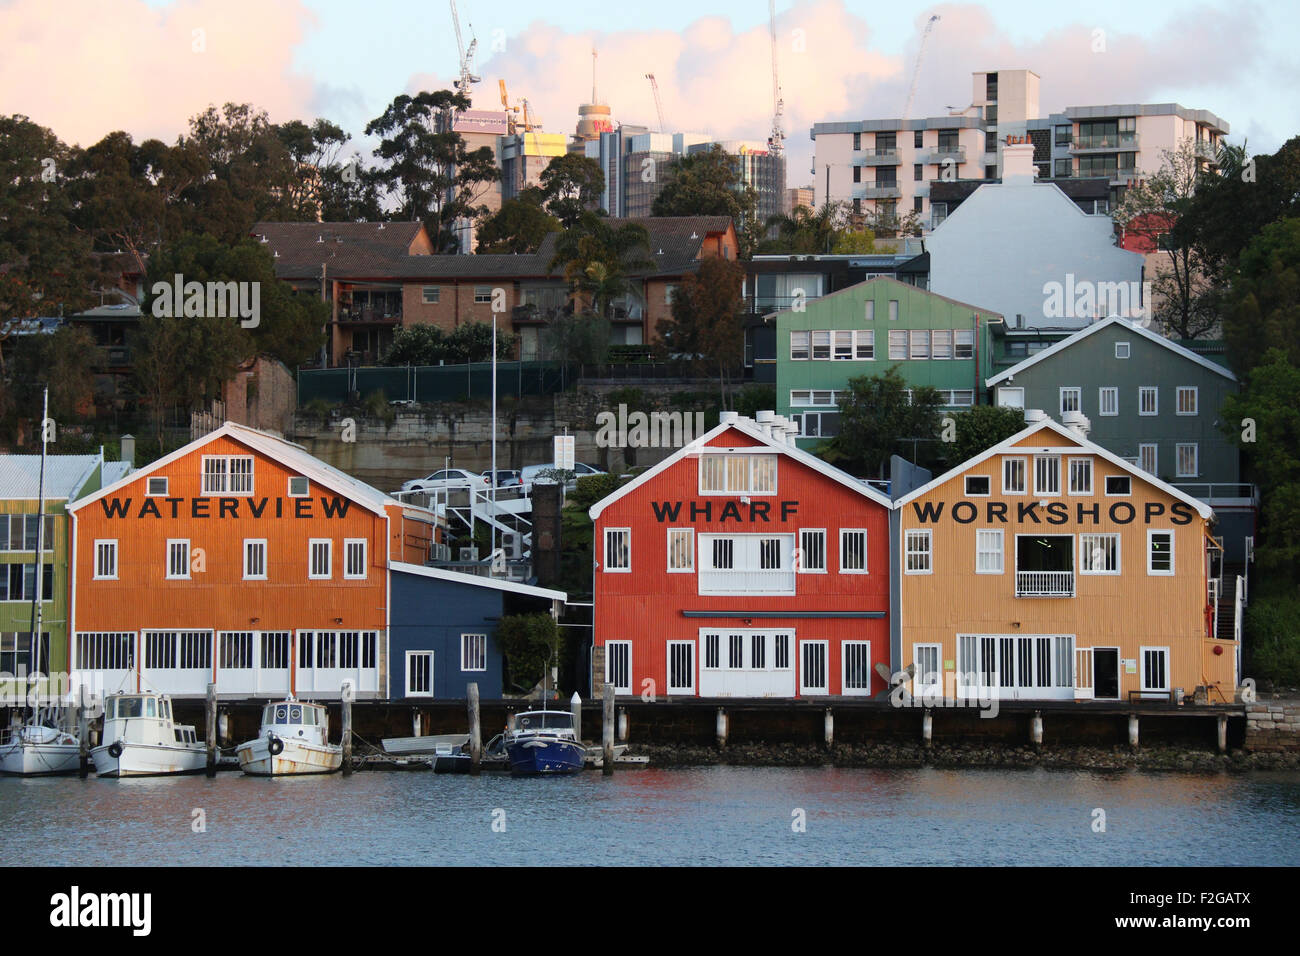 The colourful buildings of the Waterview Wharf Workshops in the Sydney suburb of Balmain. Stock Photo